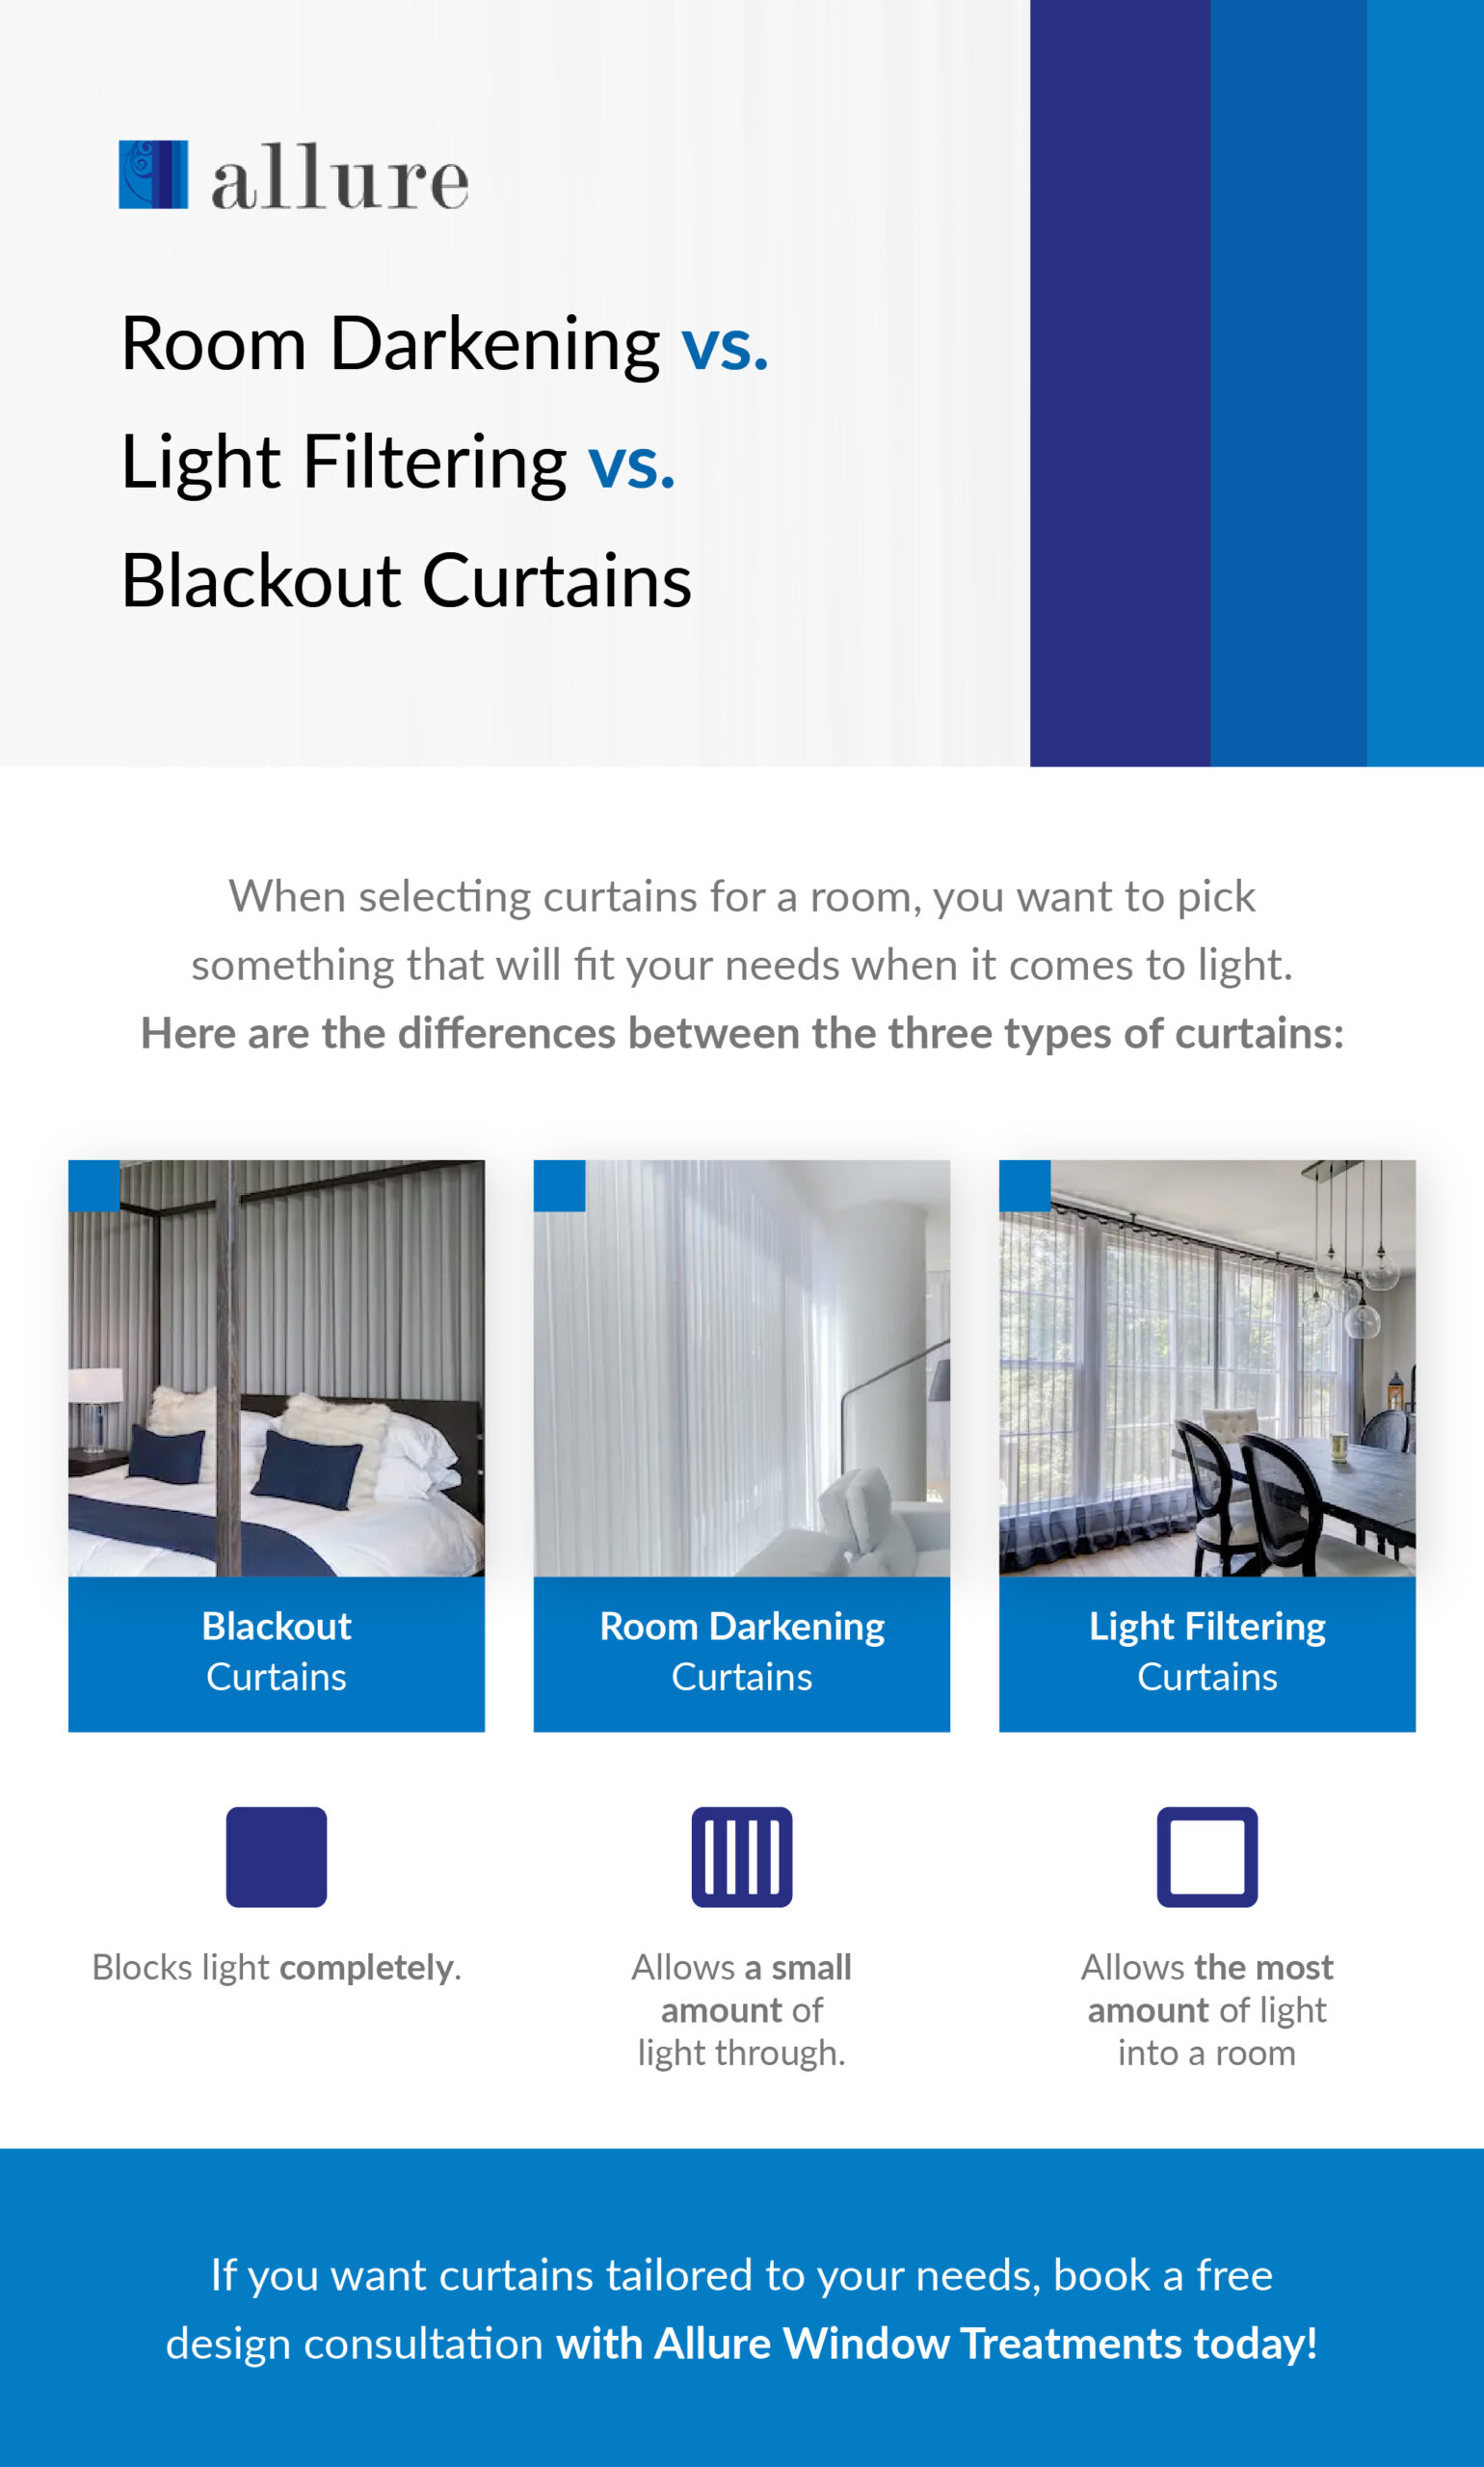 Thermal vs Blackout Curtains: What's The Difference?